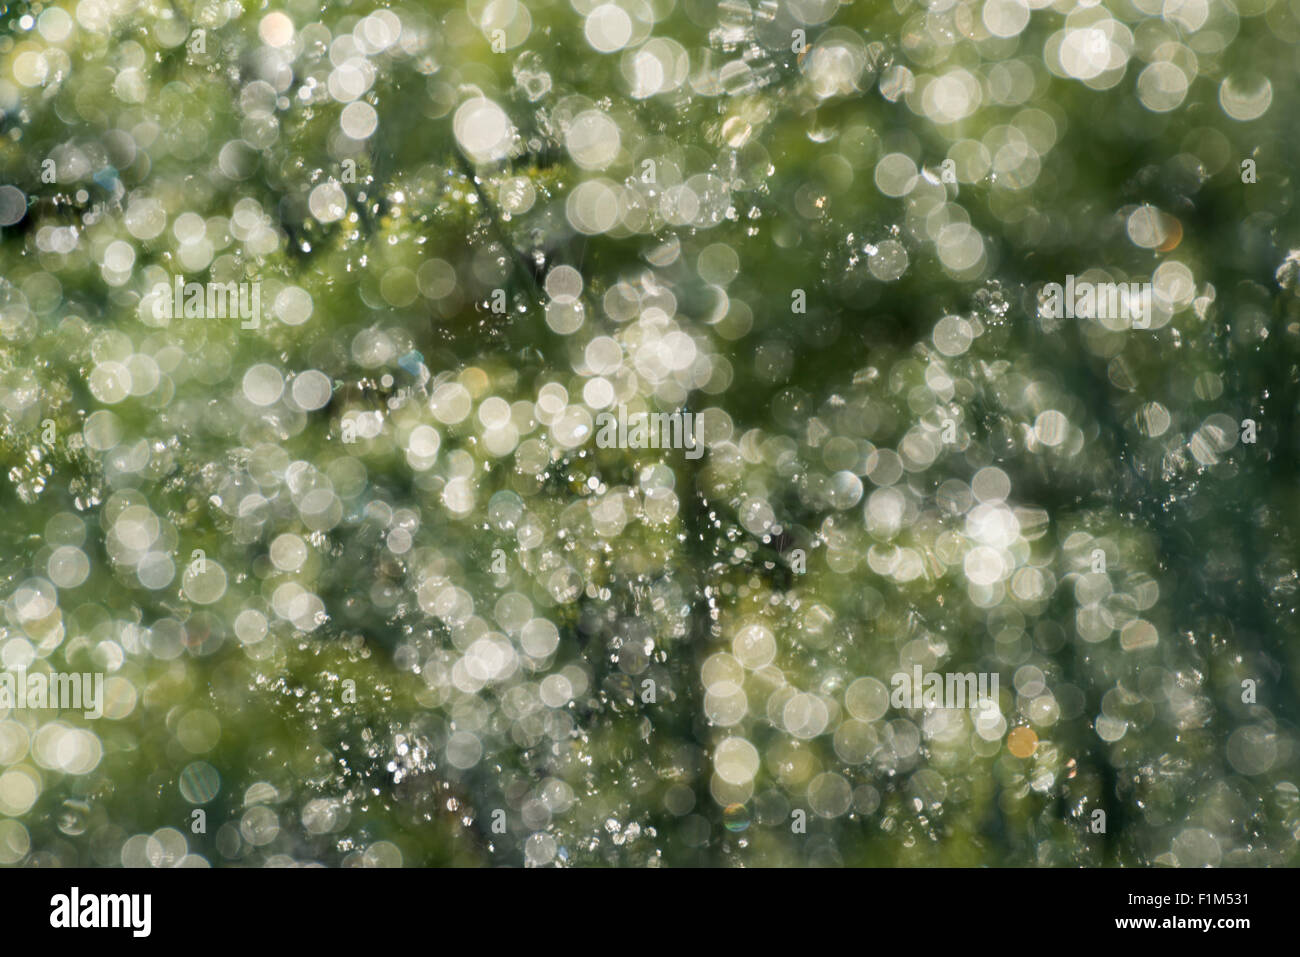 Blurring background from plants in  rain Stock Photo